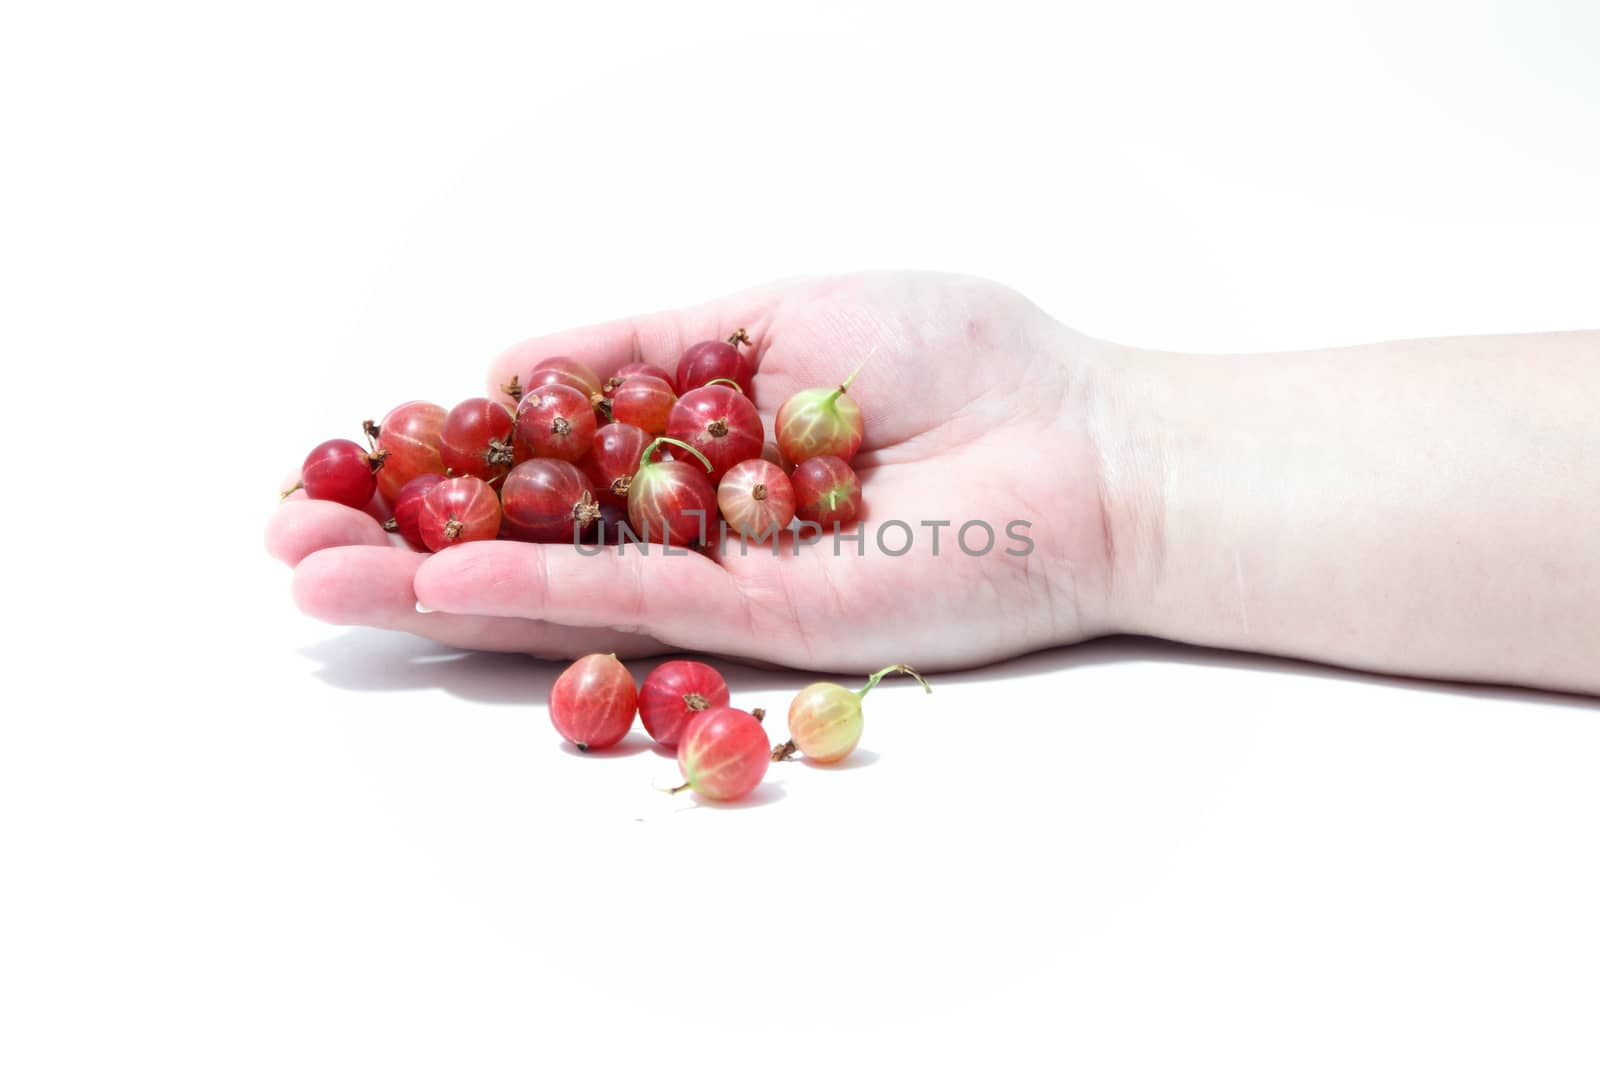 Gooseberry in hand isolated on white background